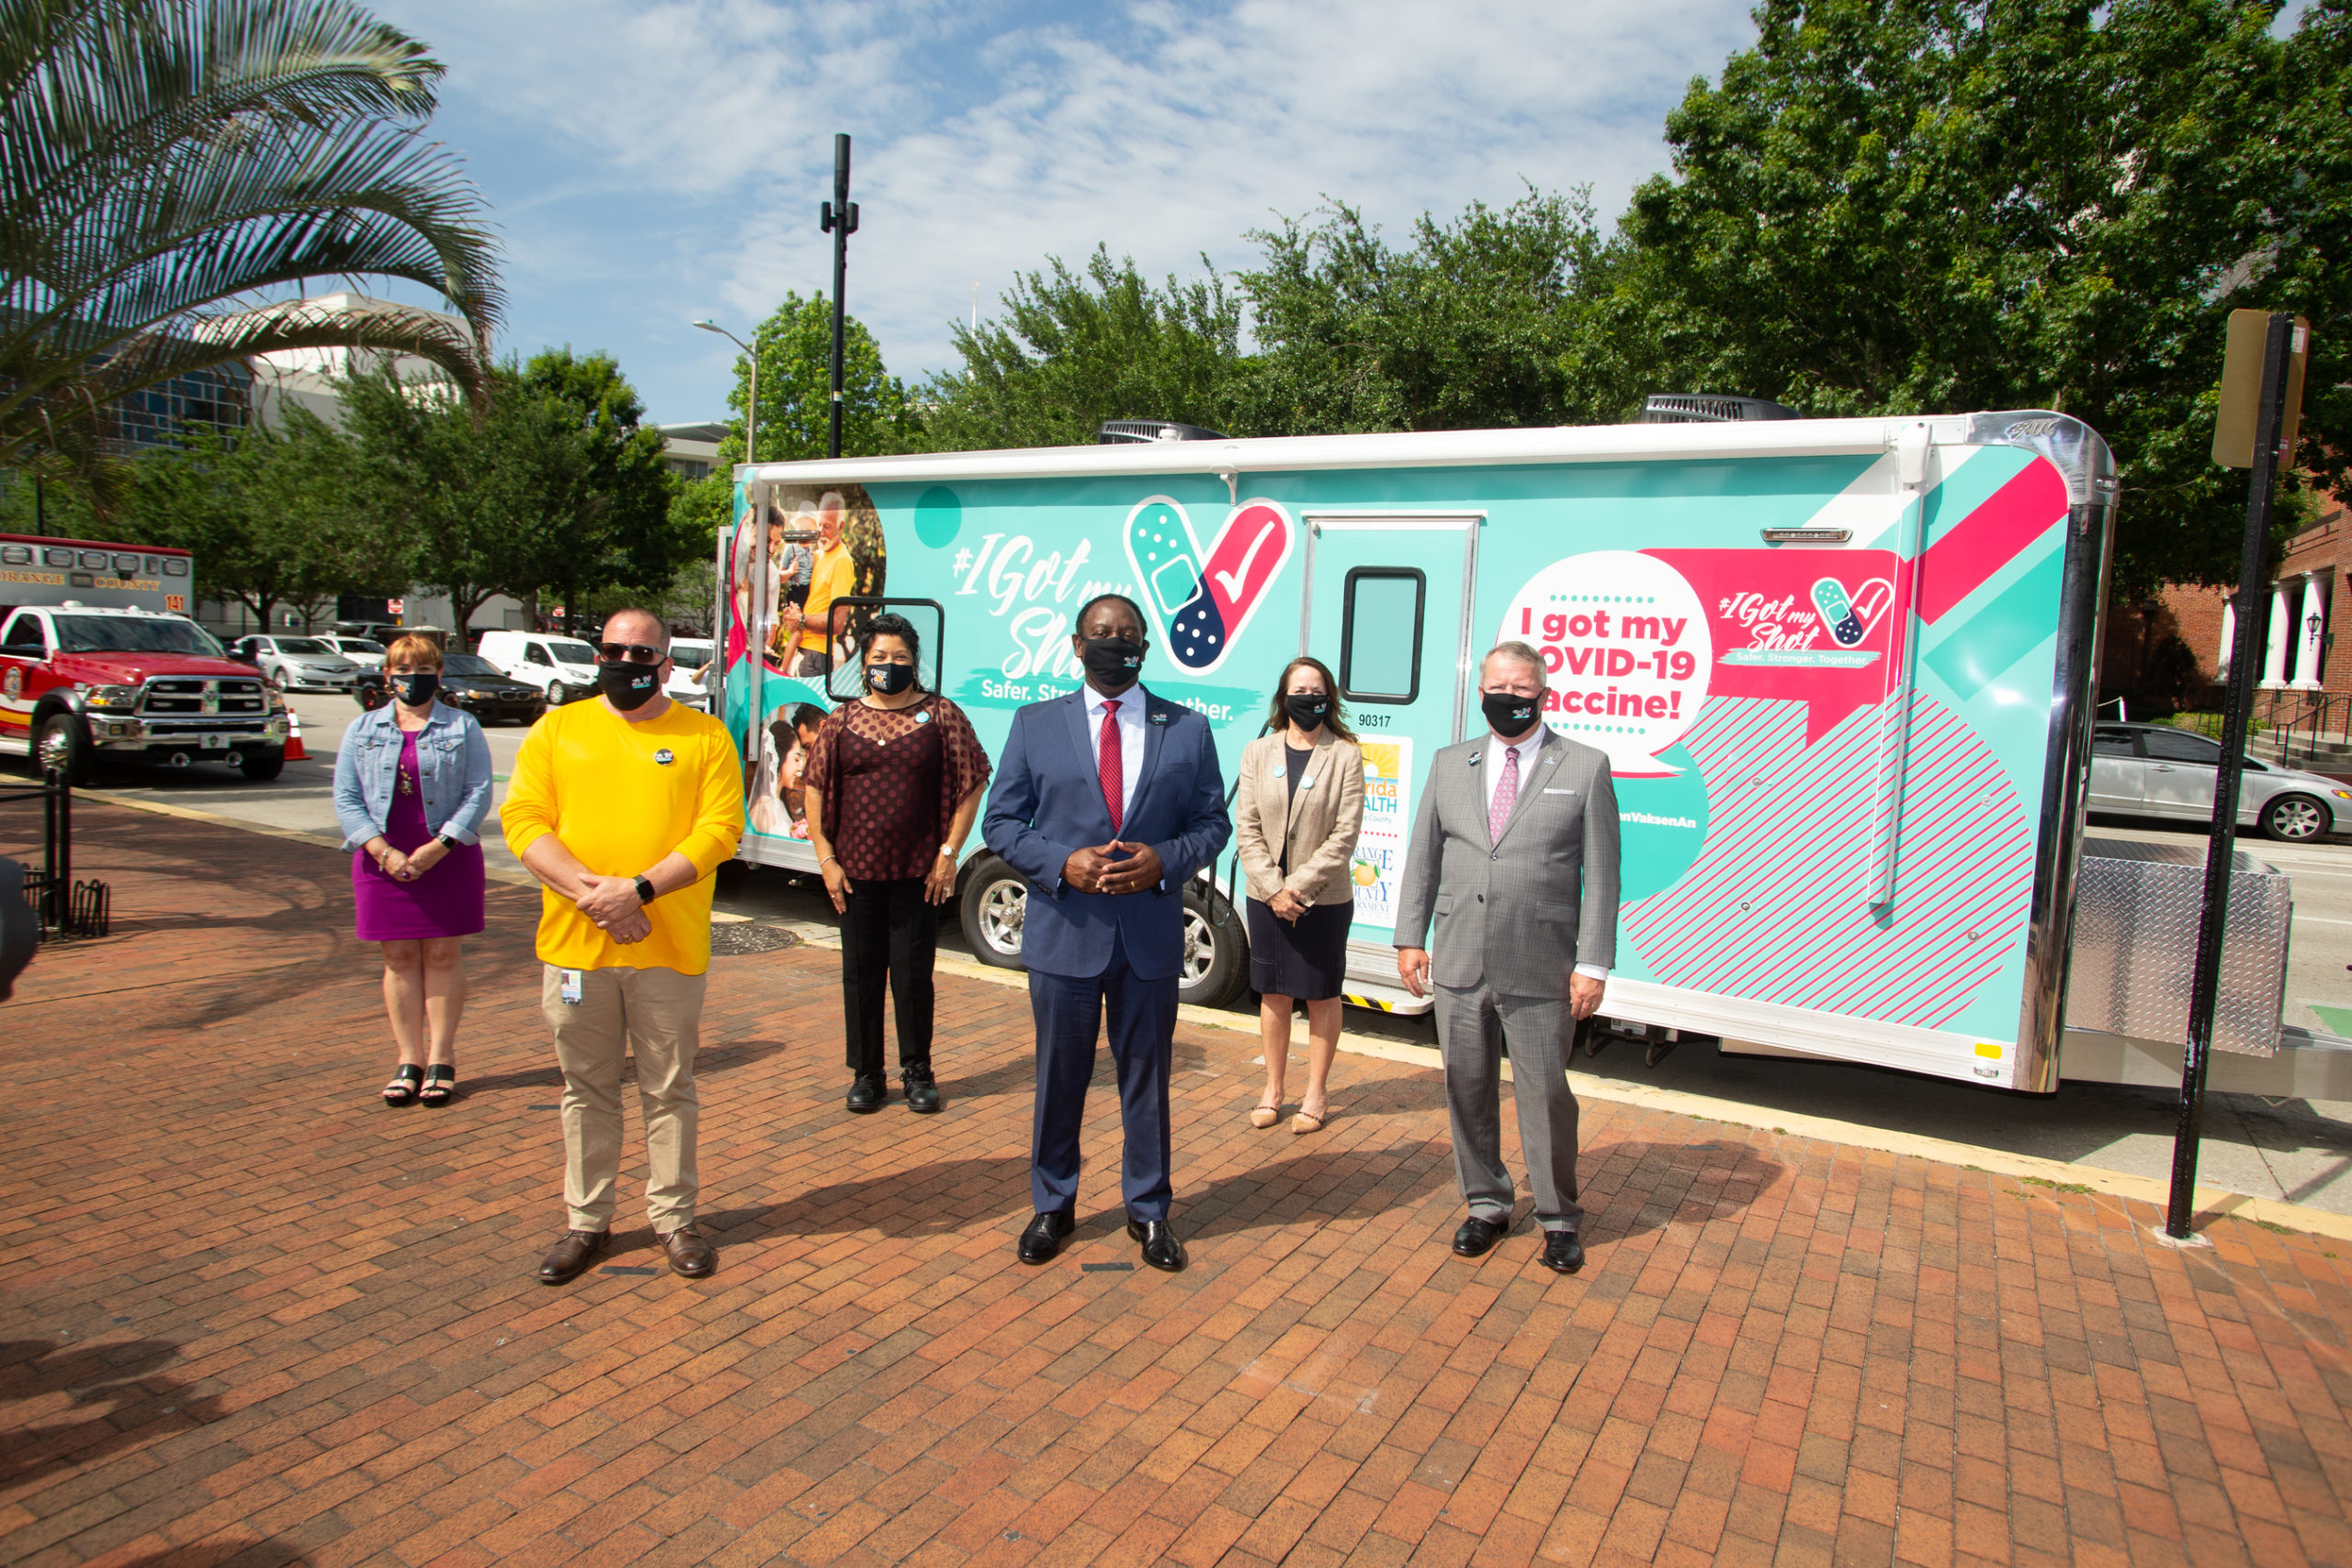 Orange County Commissioners, Orlando Mayor Dyer and Orange County Mayor Demings at the Vaccine Hesitancy Campaign launch.